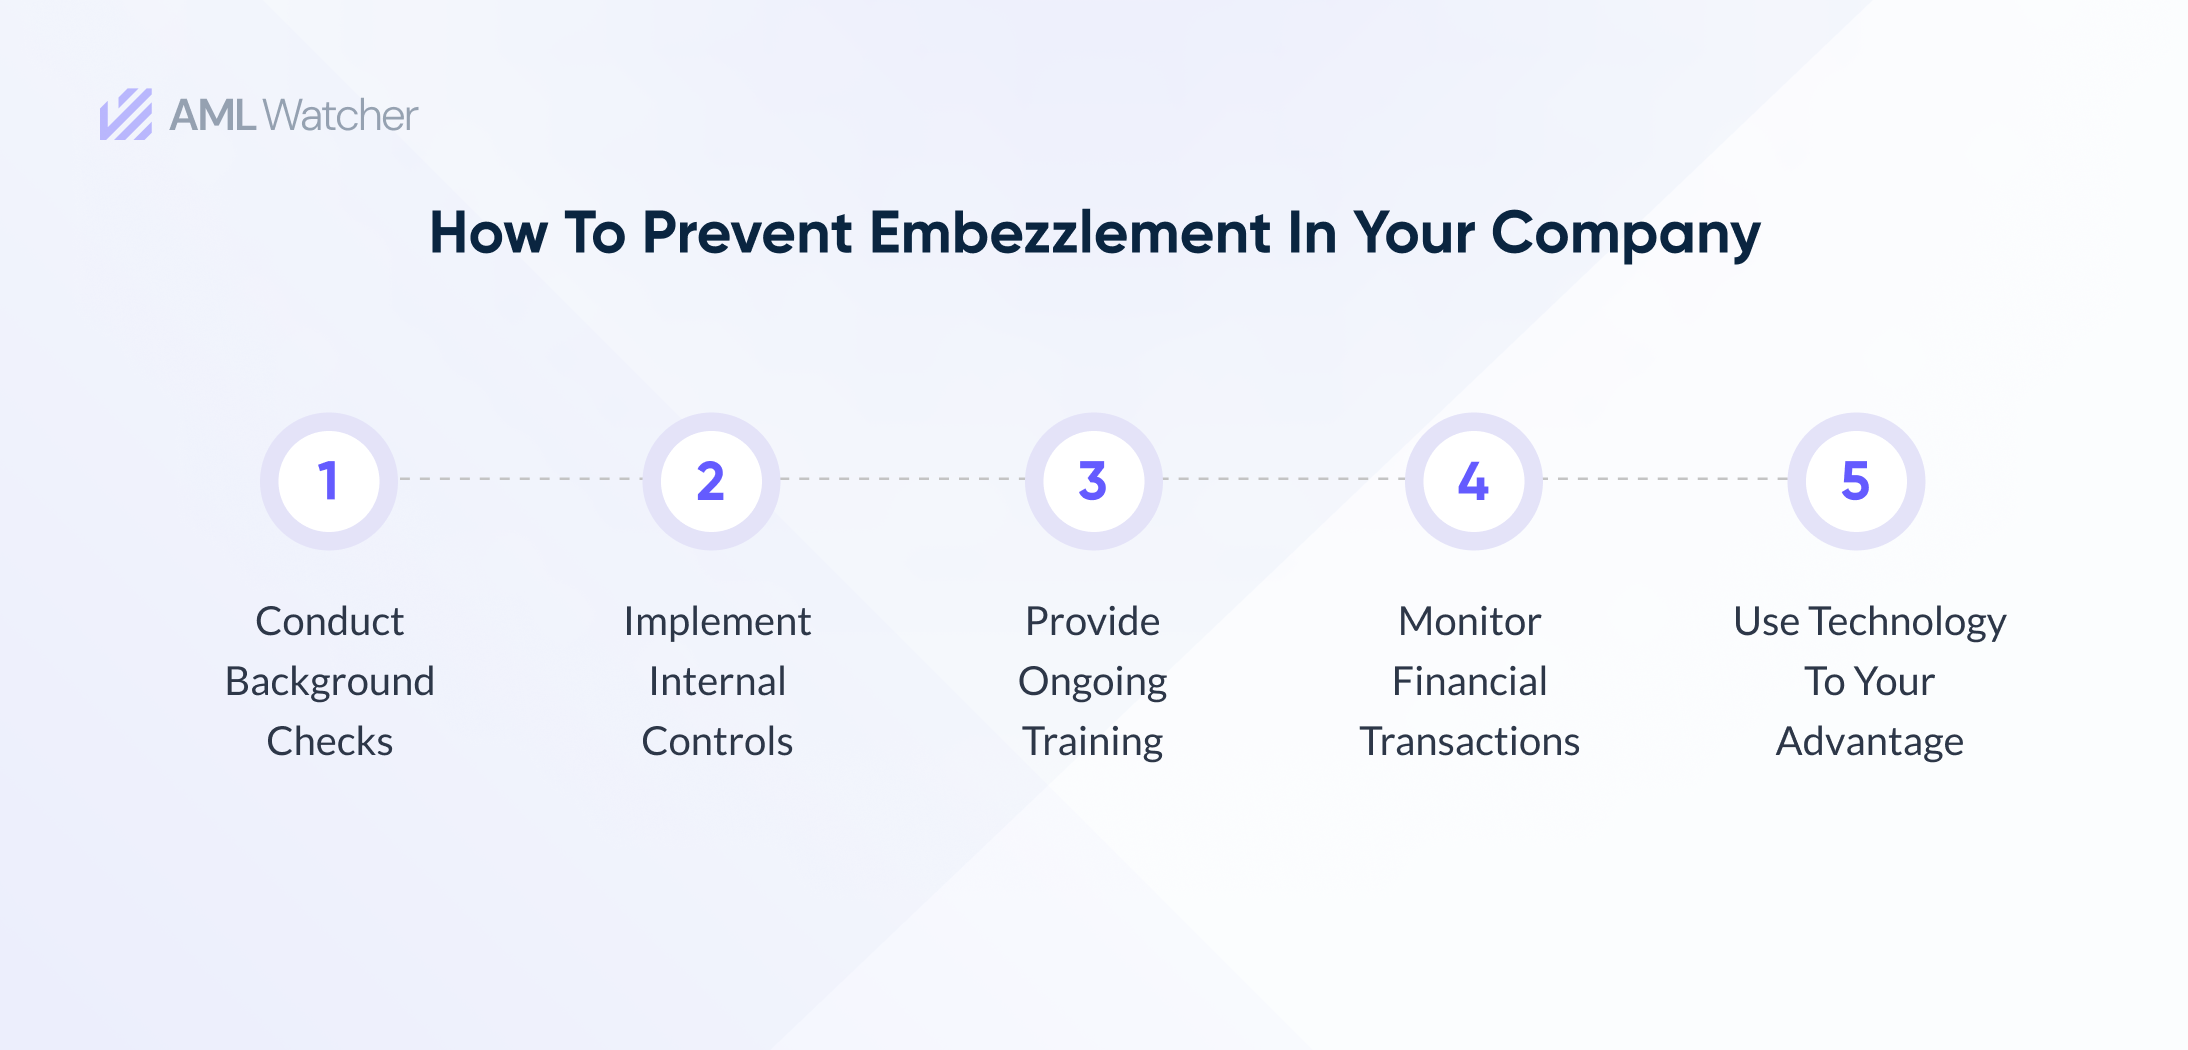 The image shows ways to prevent embezzlement 
